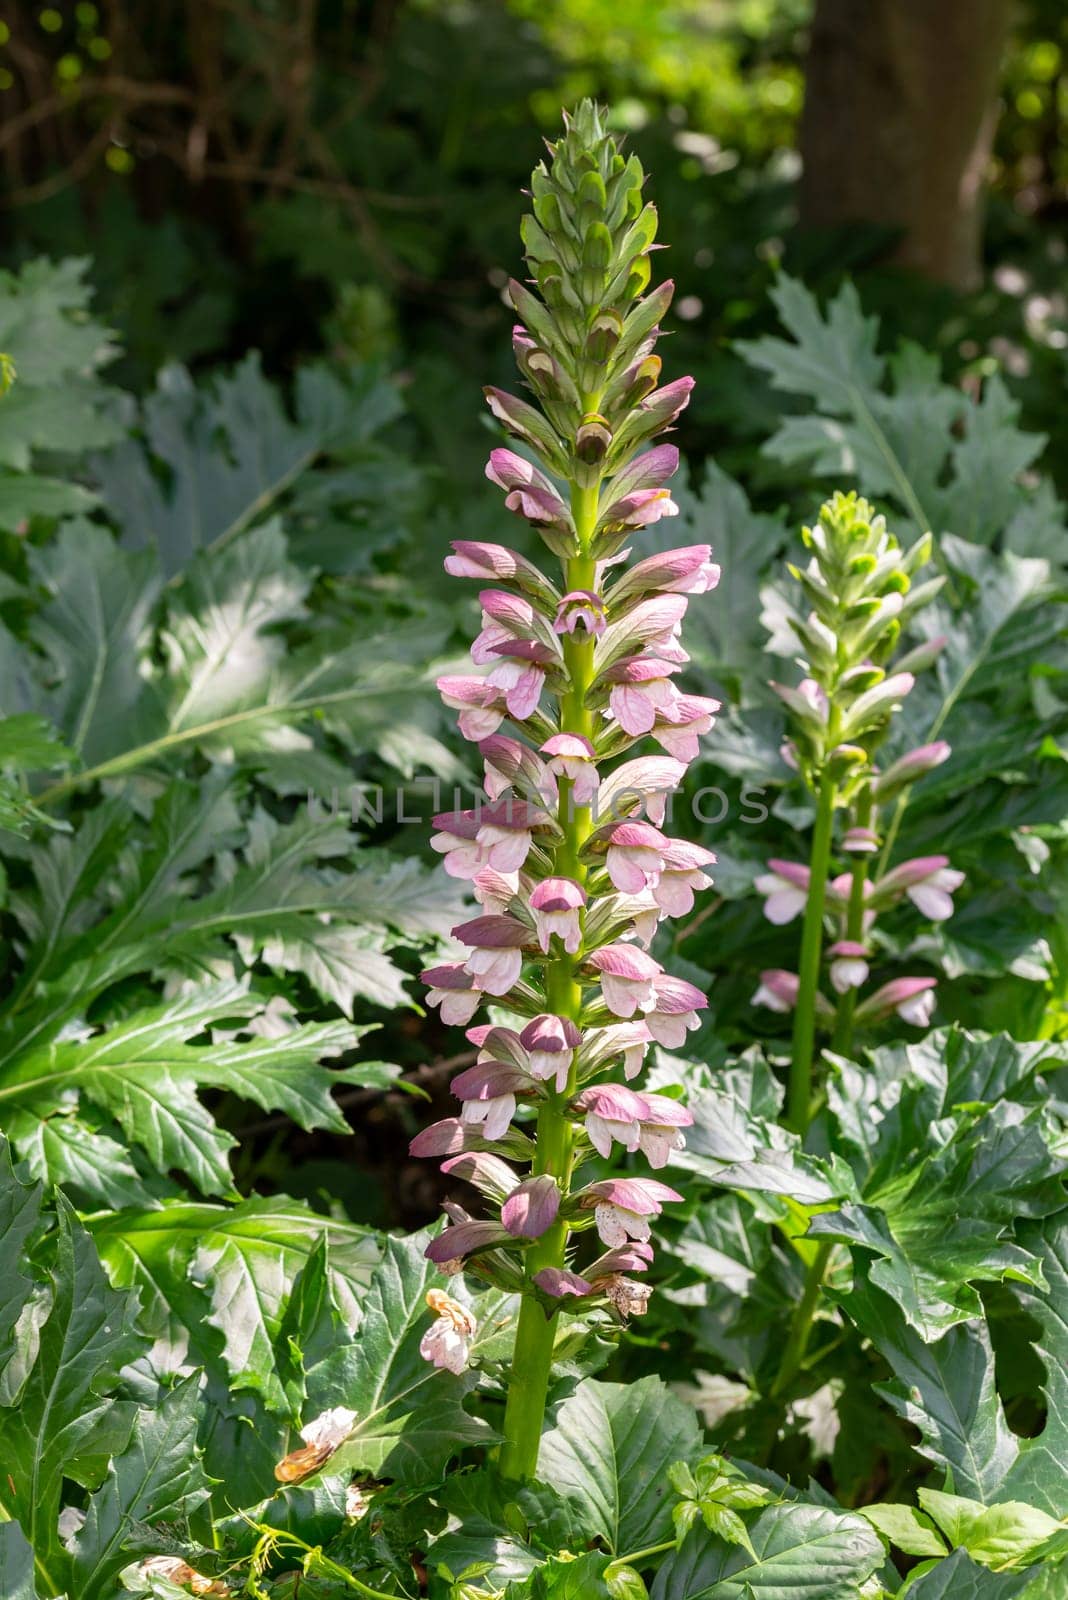 Acanthus mollis Bear's Breeches a spring summer flowering plant with a white summertime flower and a purple hood which open in July and August and is commonly knowns as Bears Breeches